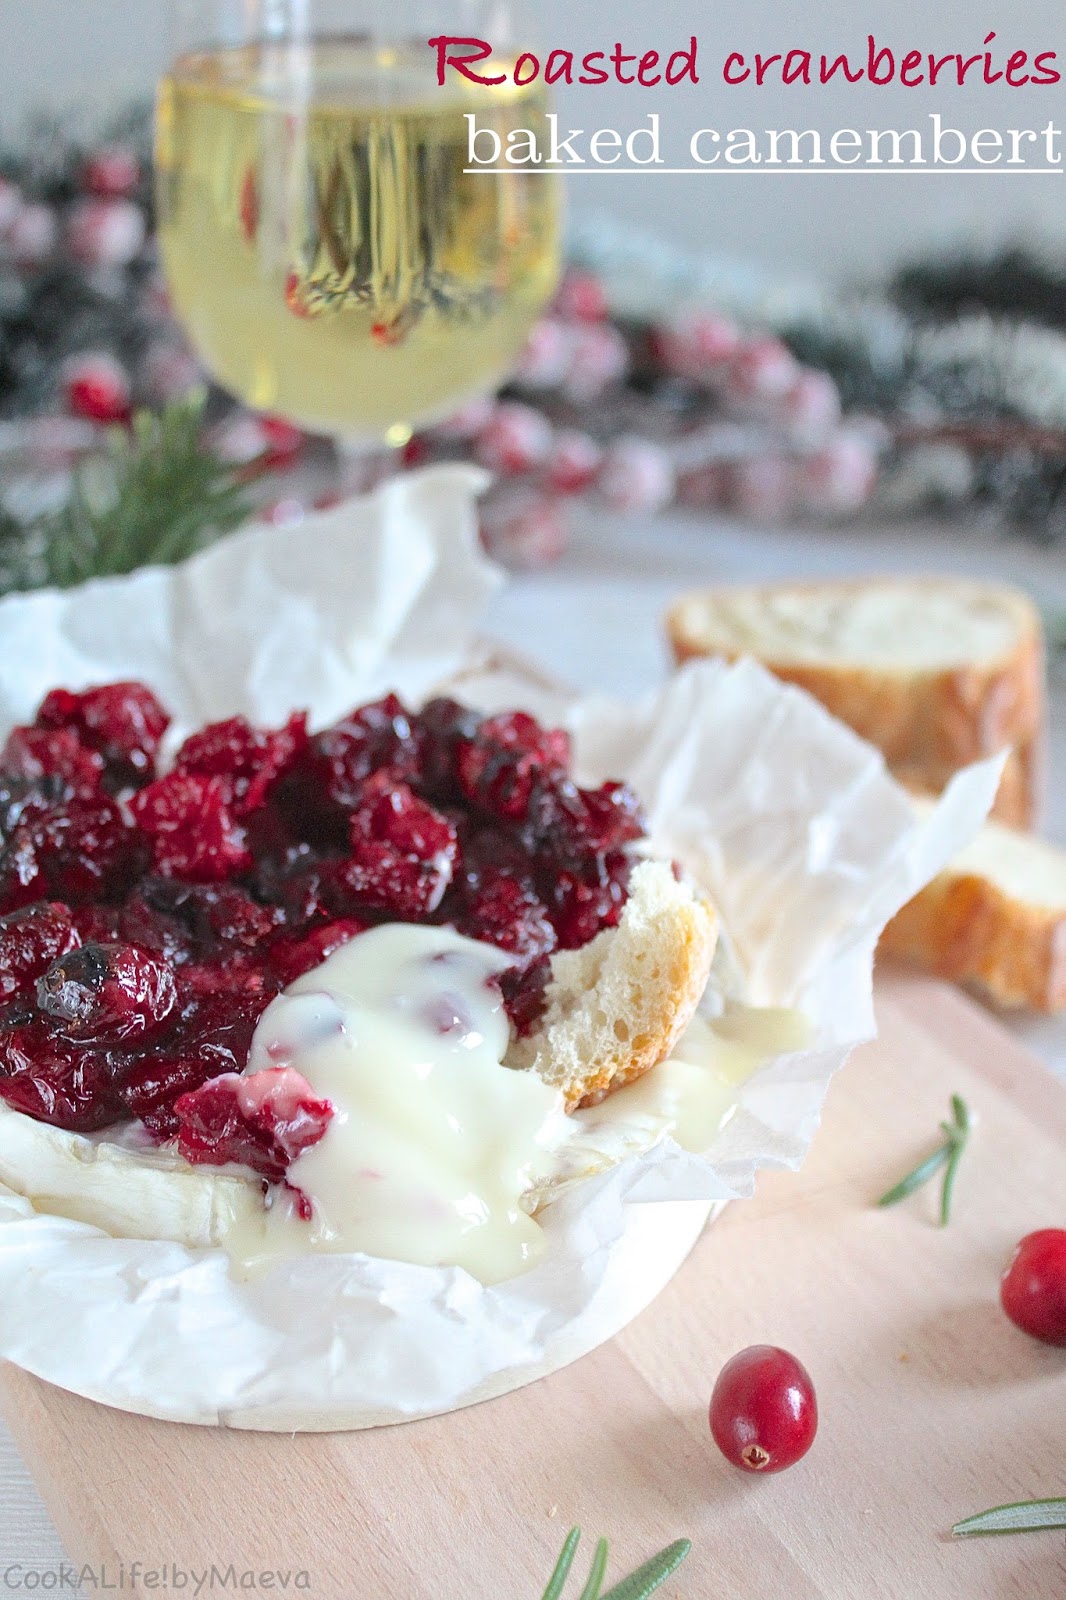 Cook A Life! by Maeva... in English: Roasted cranberries baked ...